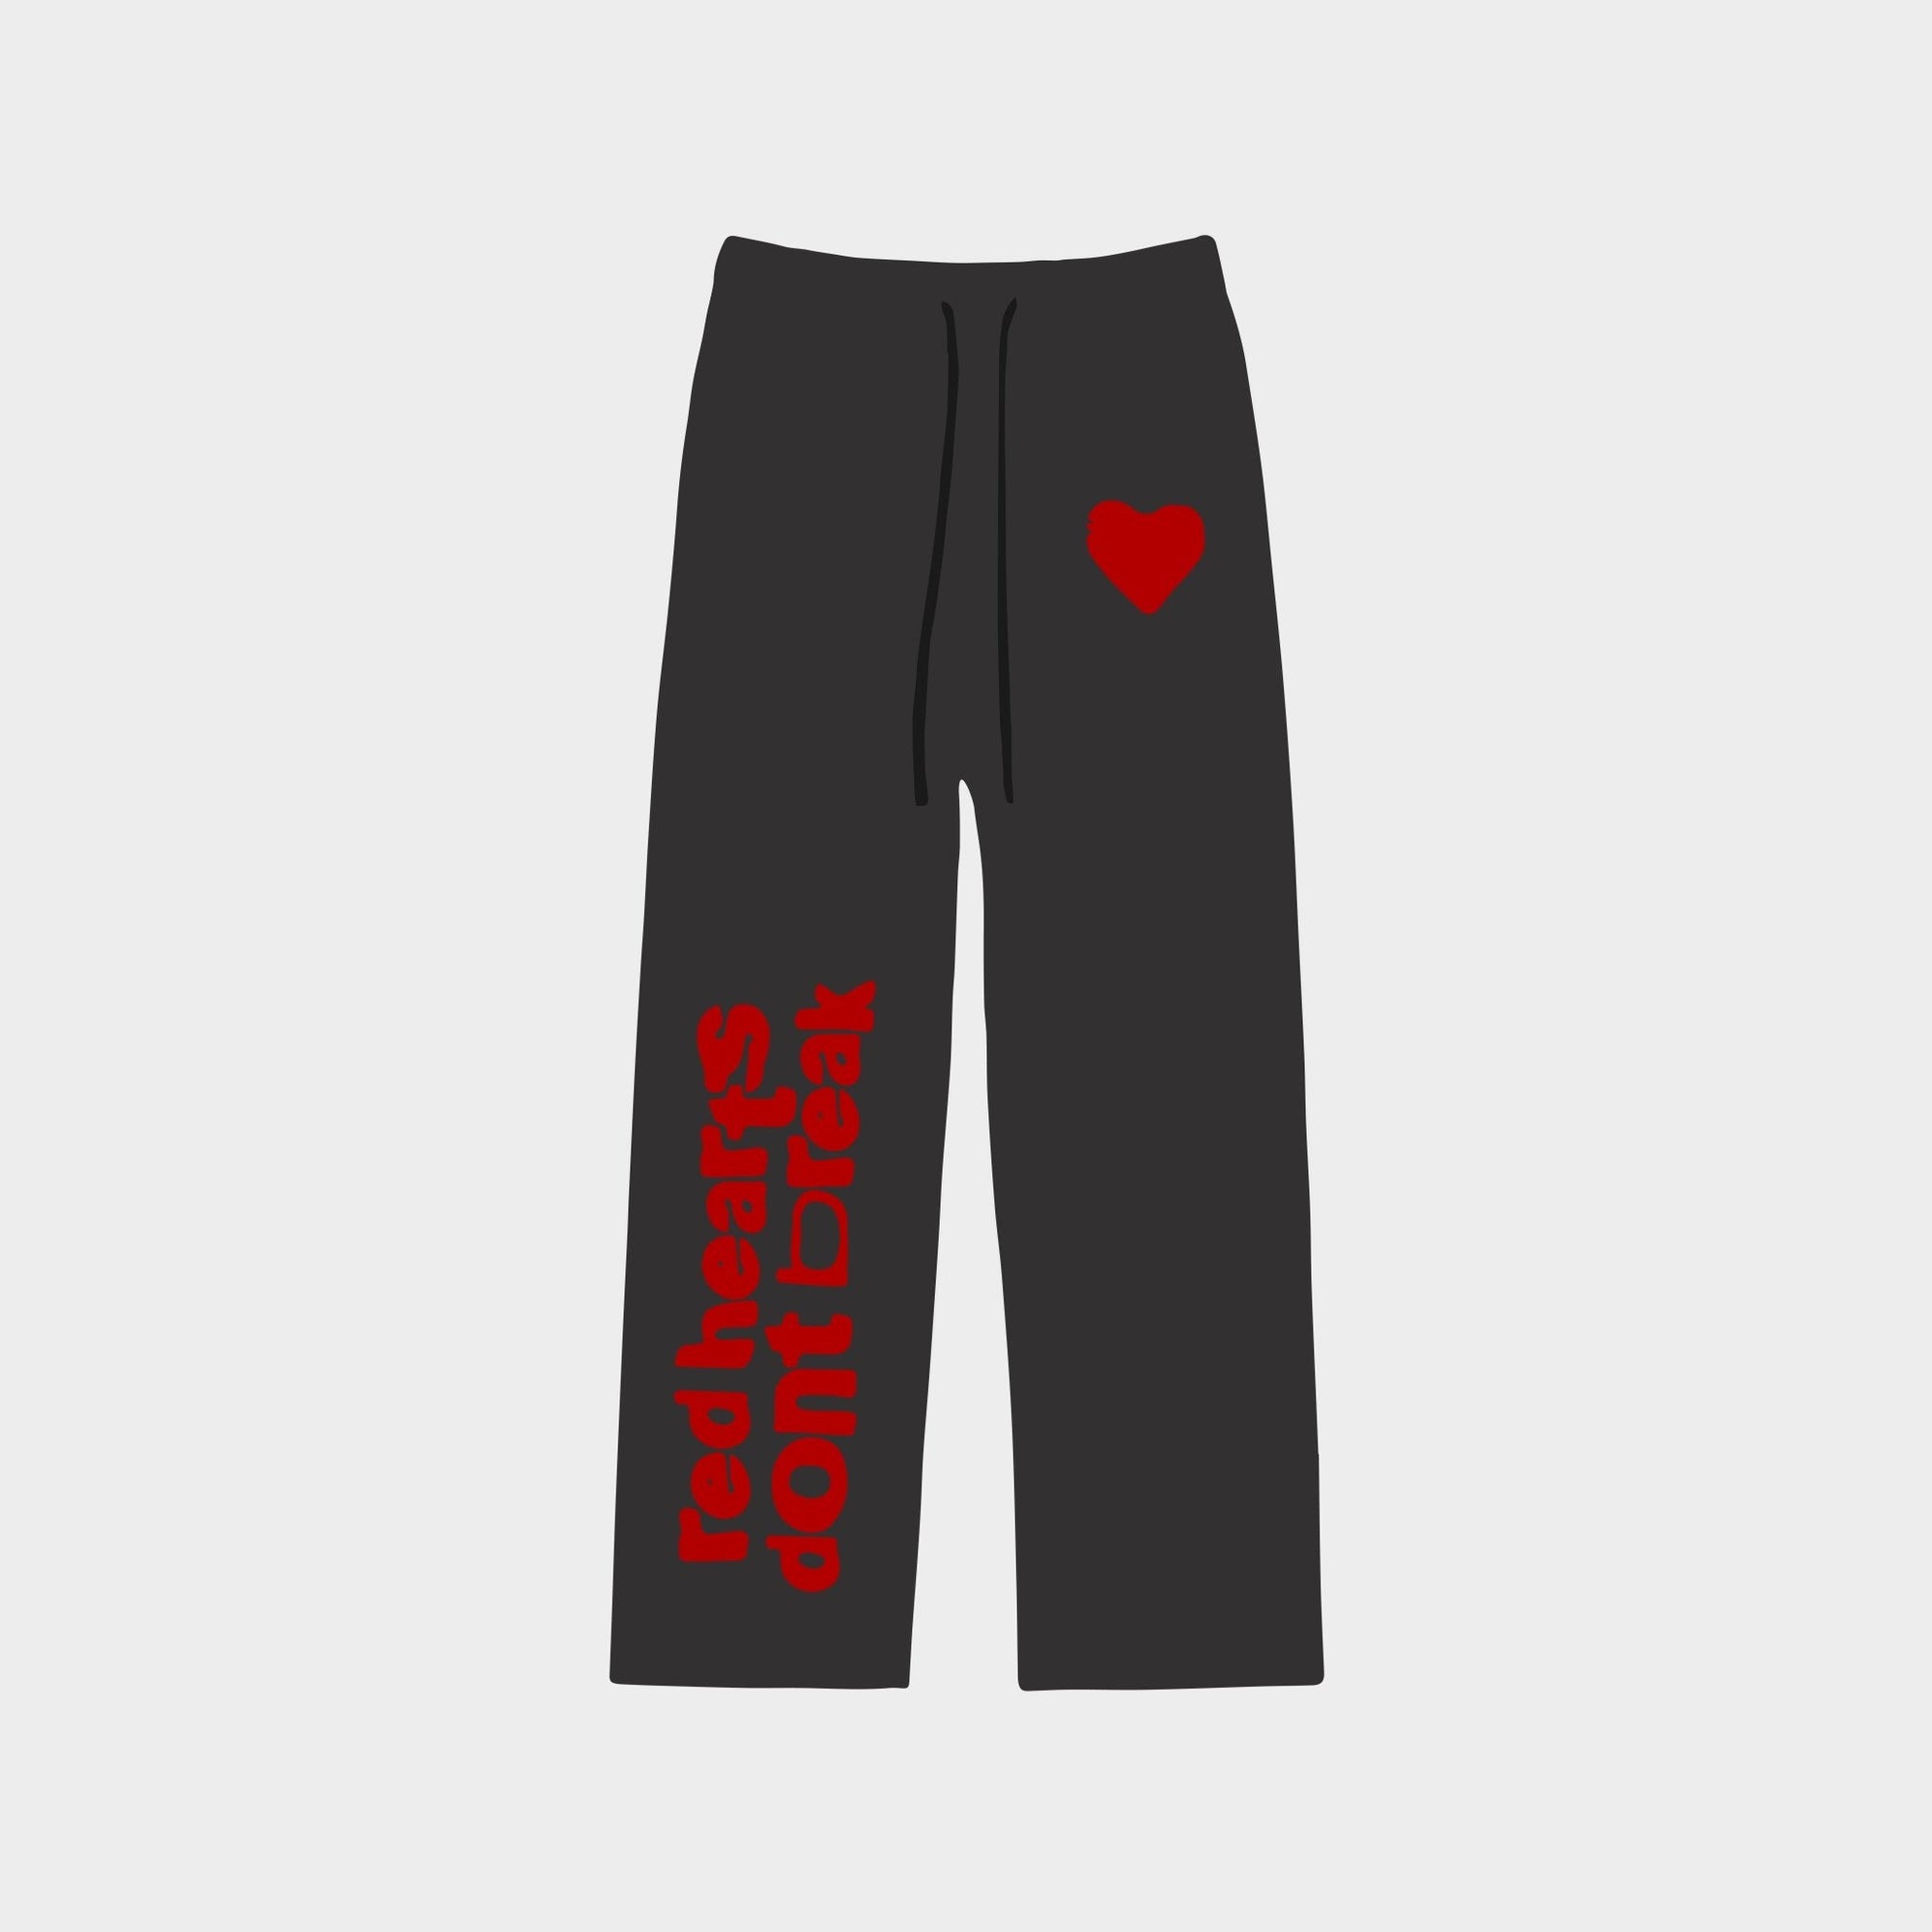 "Red <3 Don't Break" Straight Leg Pant - RED LETTERS